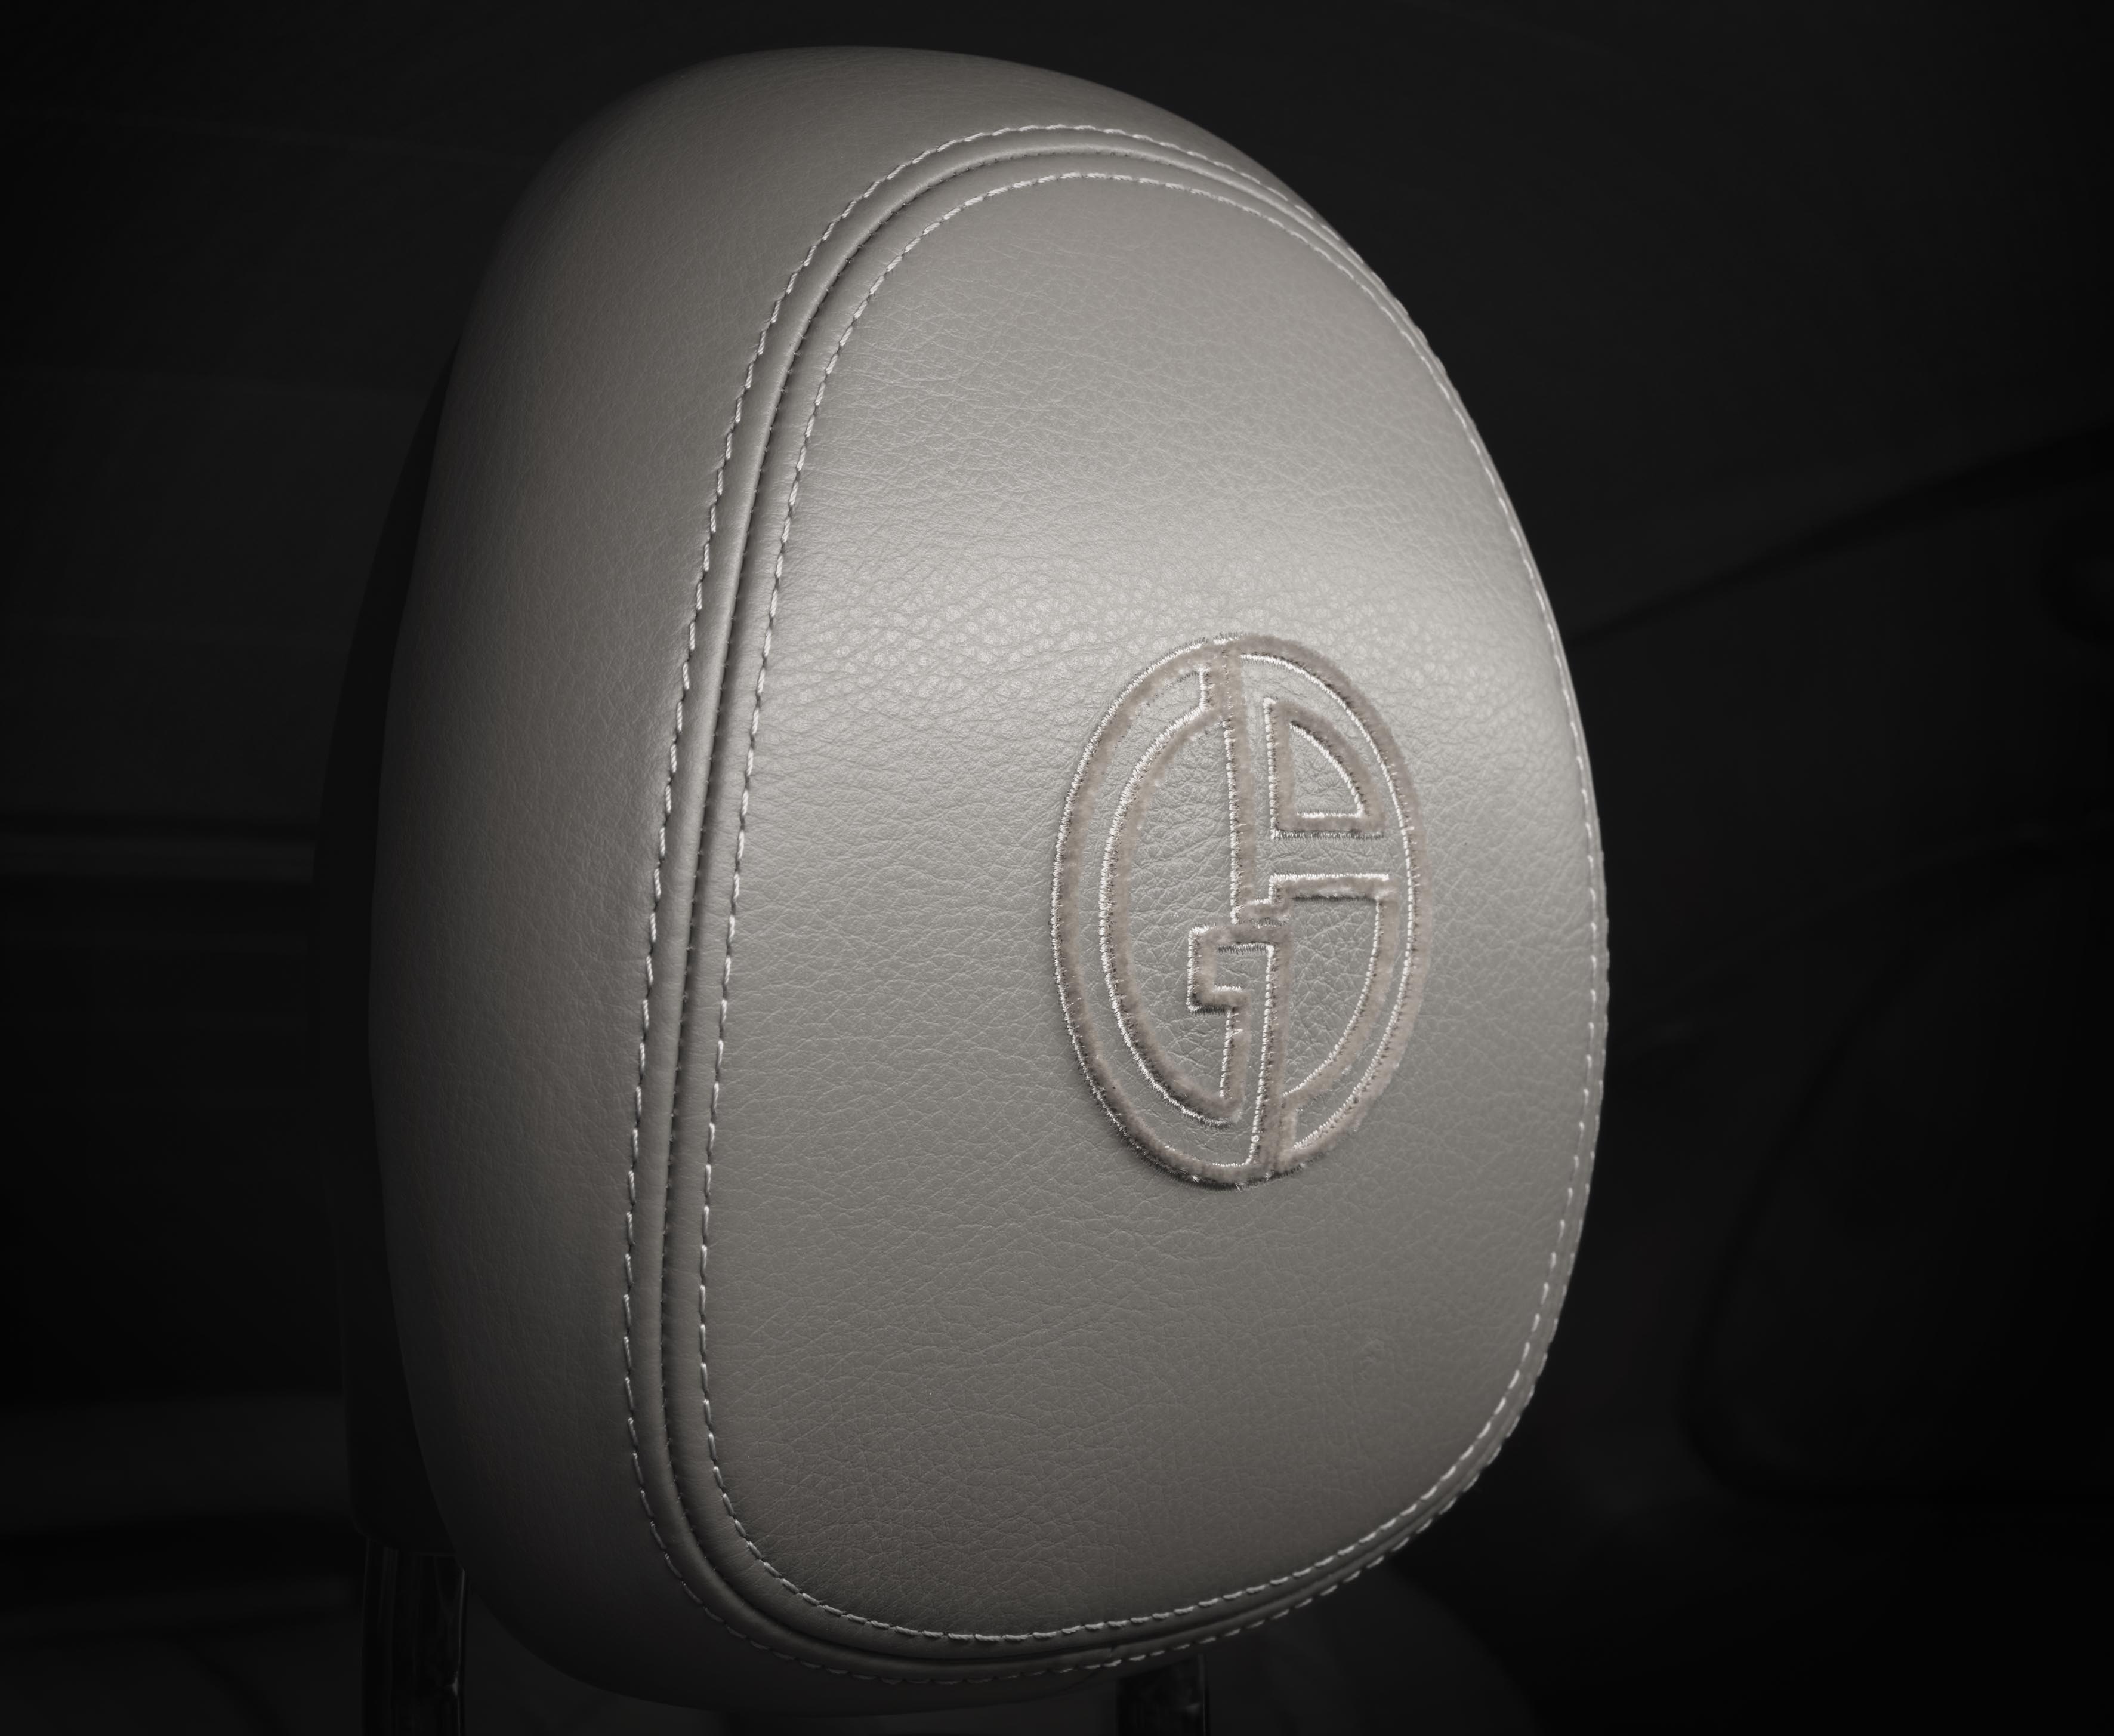 Introducing the sustainable Fiat 500 model, exclusively designed by Giorgio Armani (фото 3)